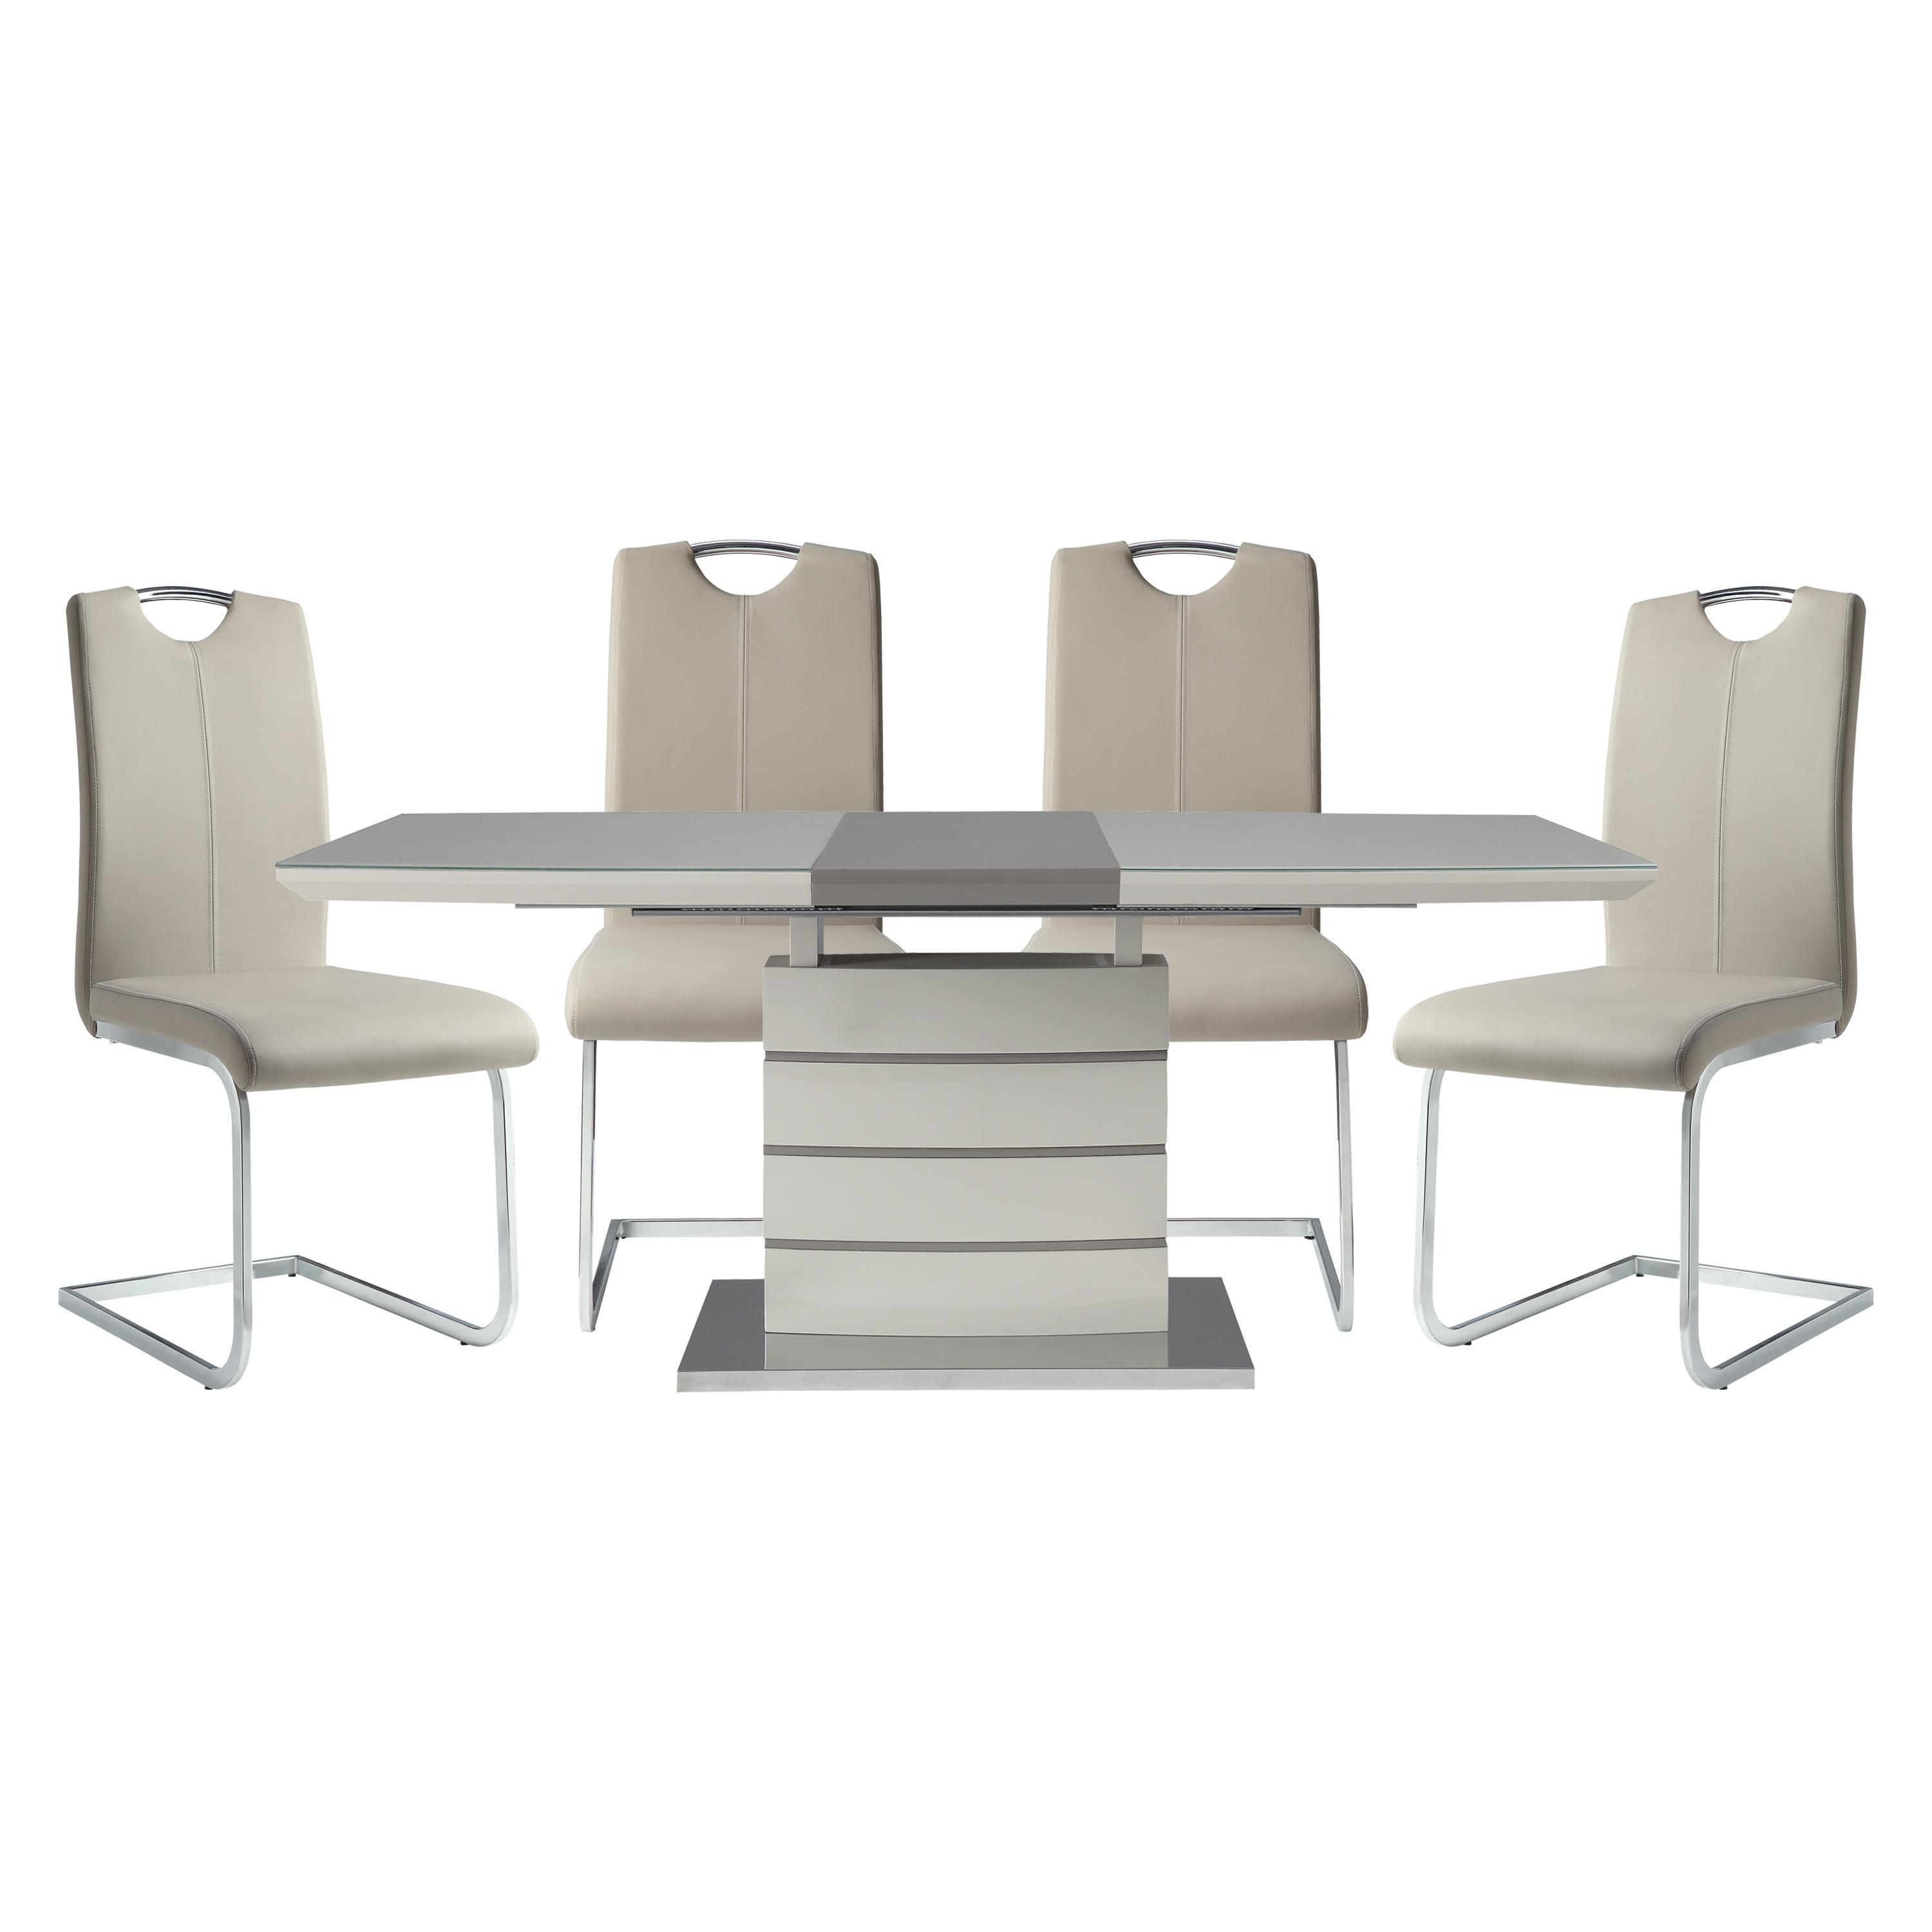 Contemporary Dining Room Set 5599-71*5PC Glissand 5599-71*5PC in White Faux Leather